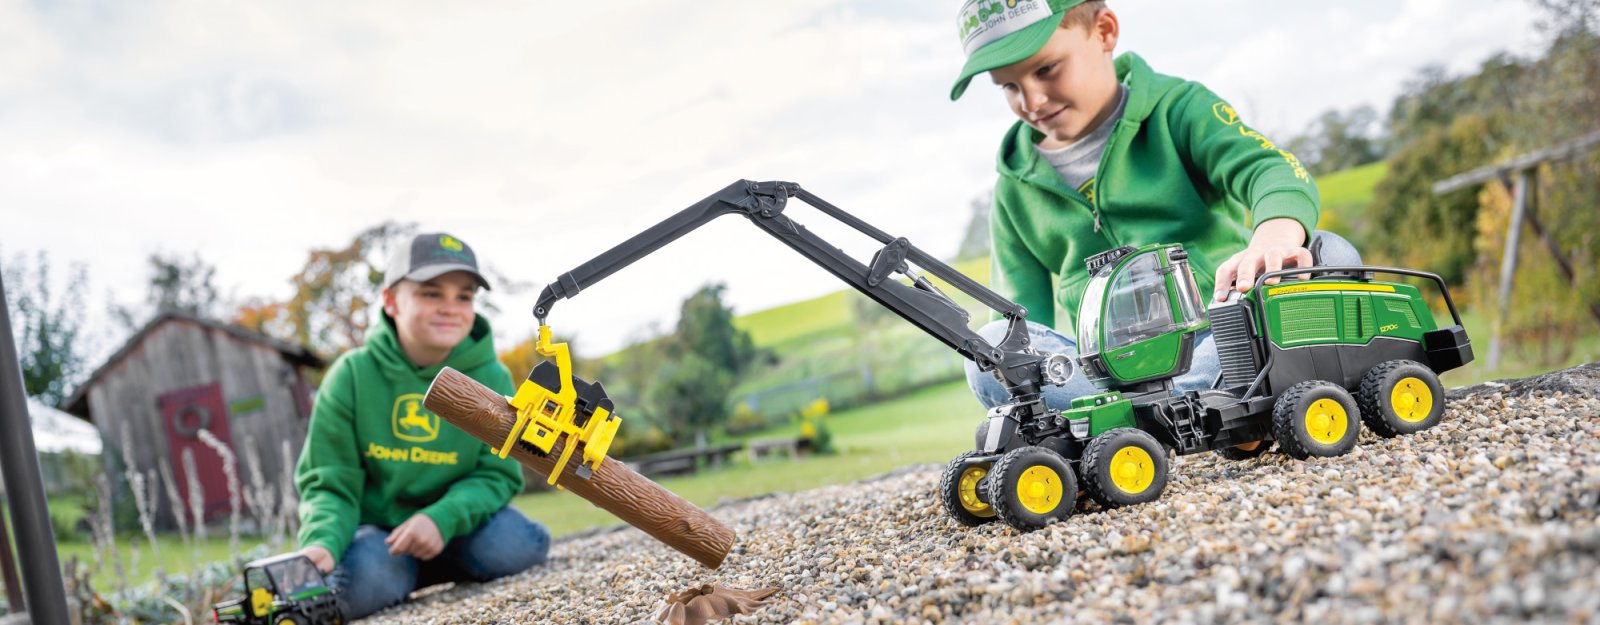 Get Your Christmas Revving with John Deere, Stihl and Husqvarna Gifts from Balmers GM